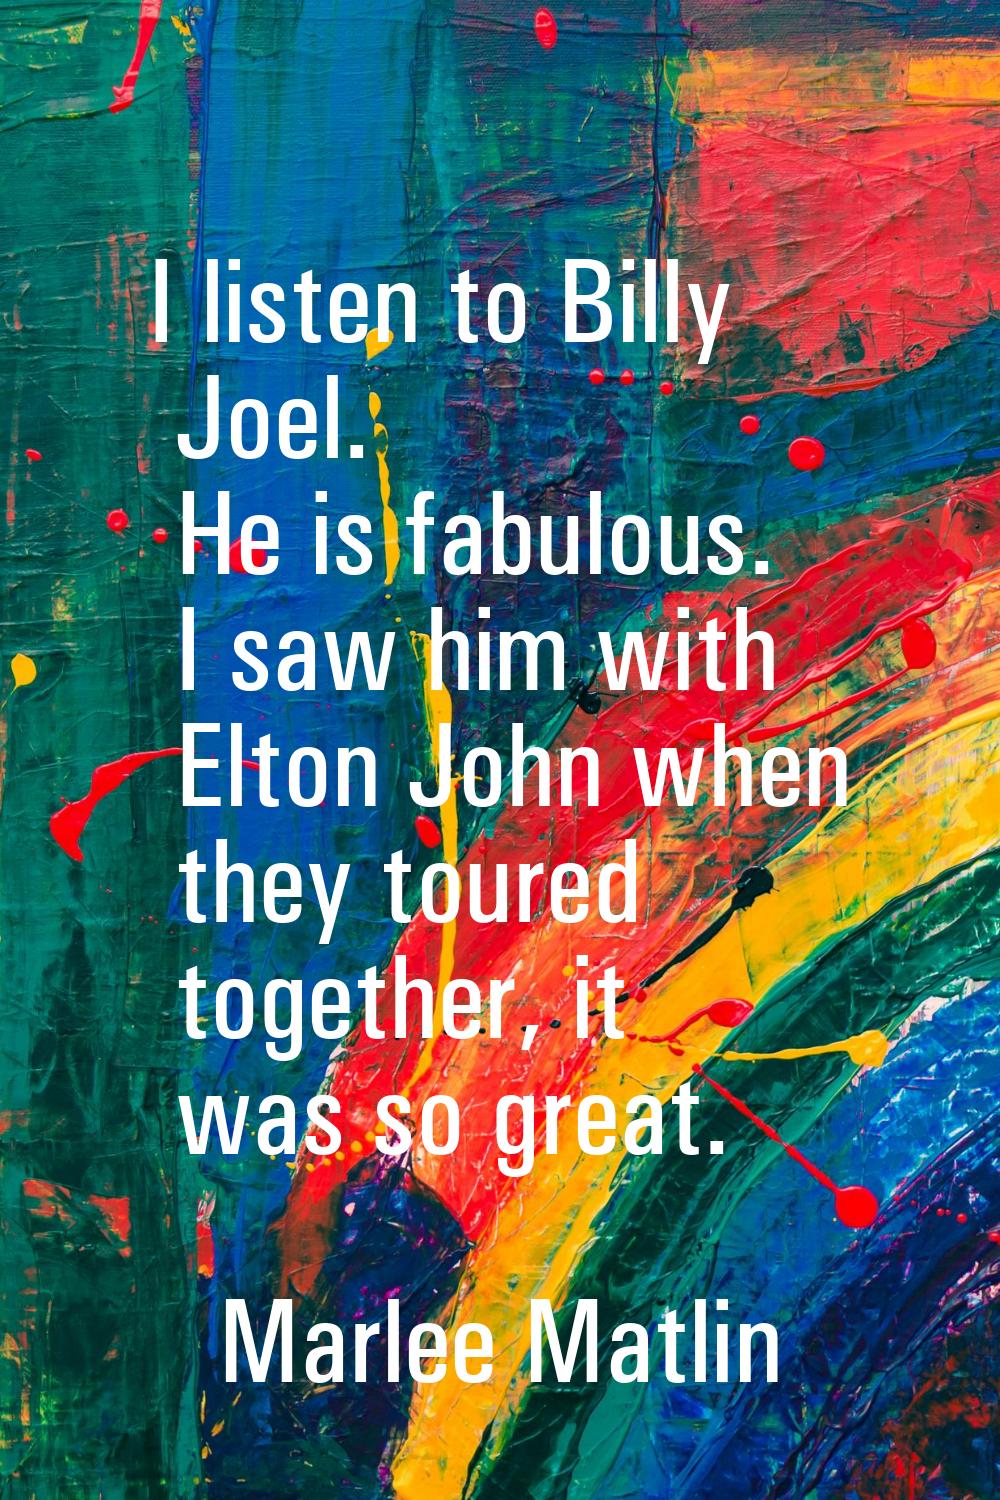 I listen to Billy Joel. He is fabulous. I saw him with Elton John when they toured together, it was